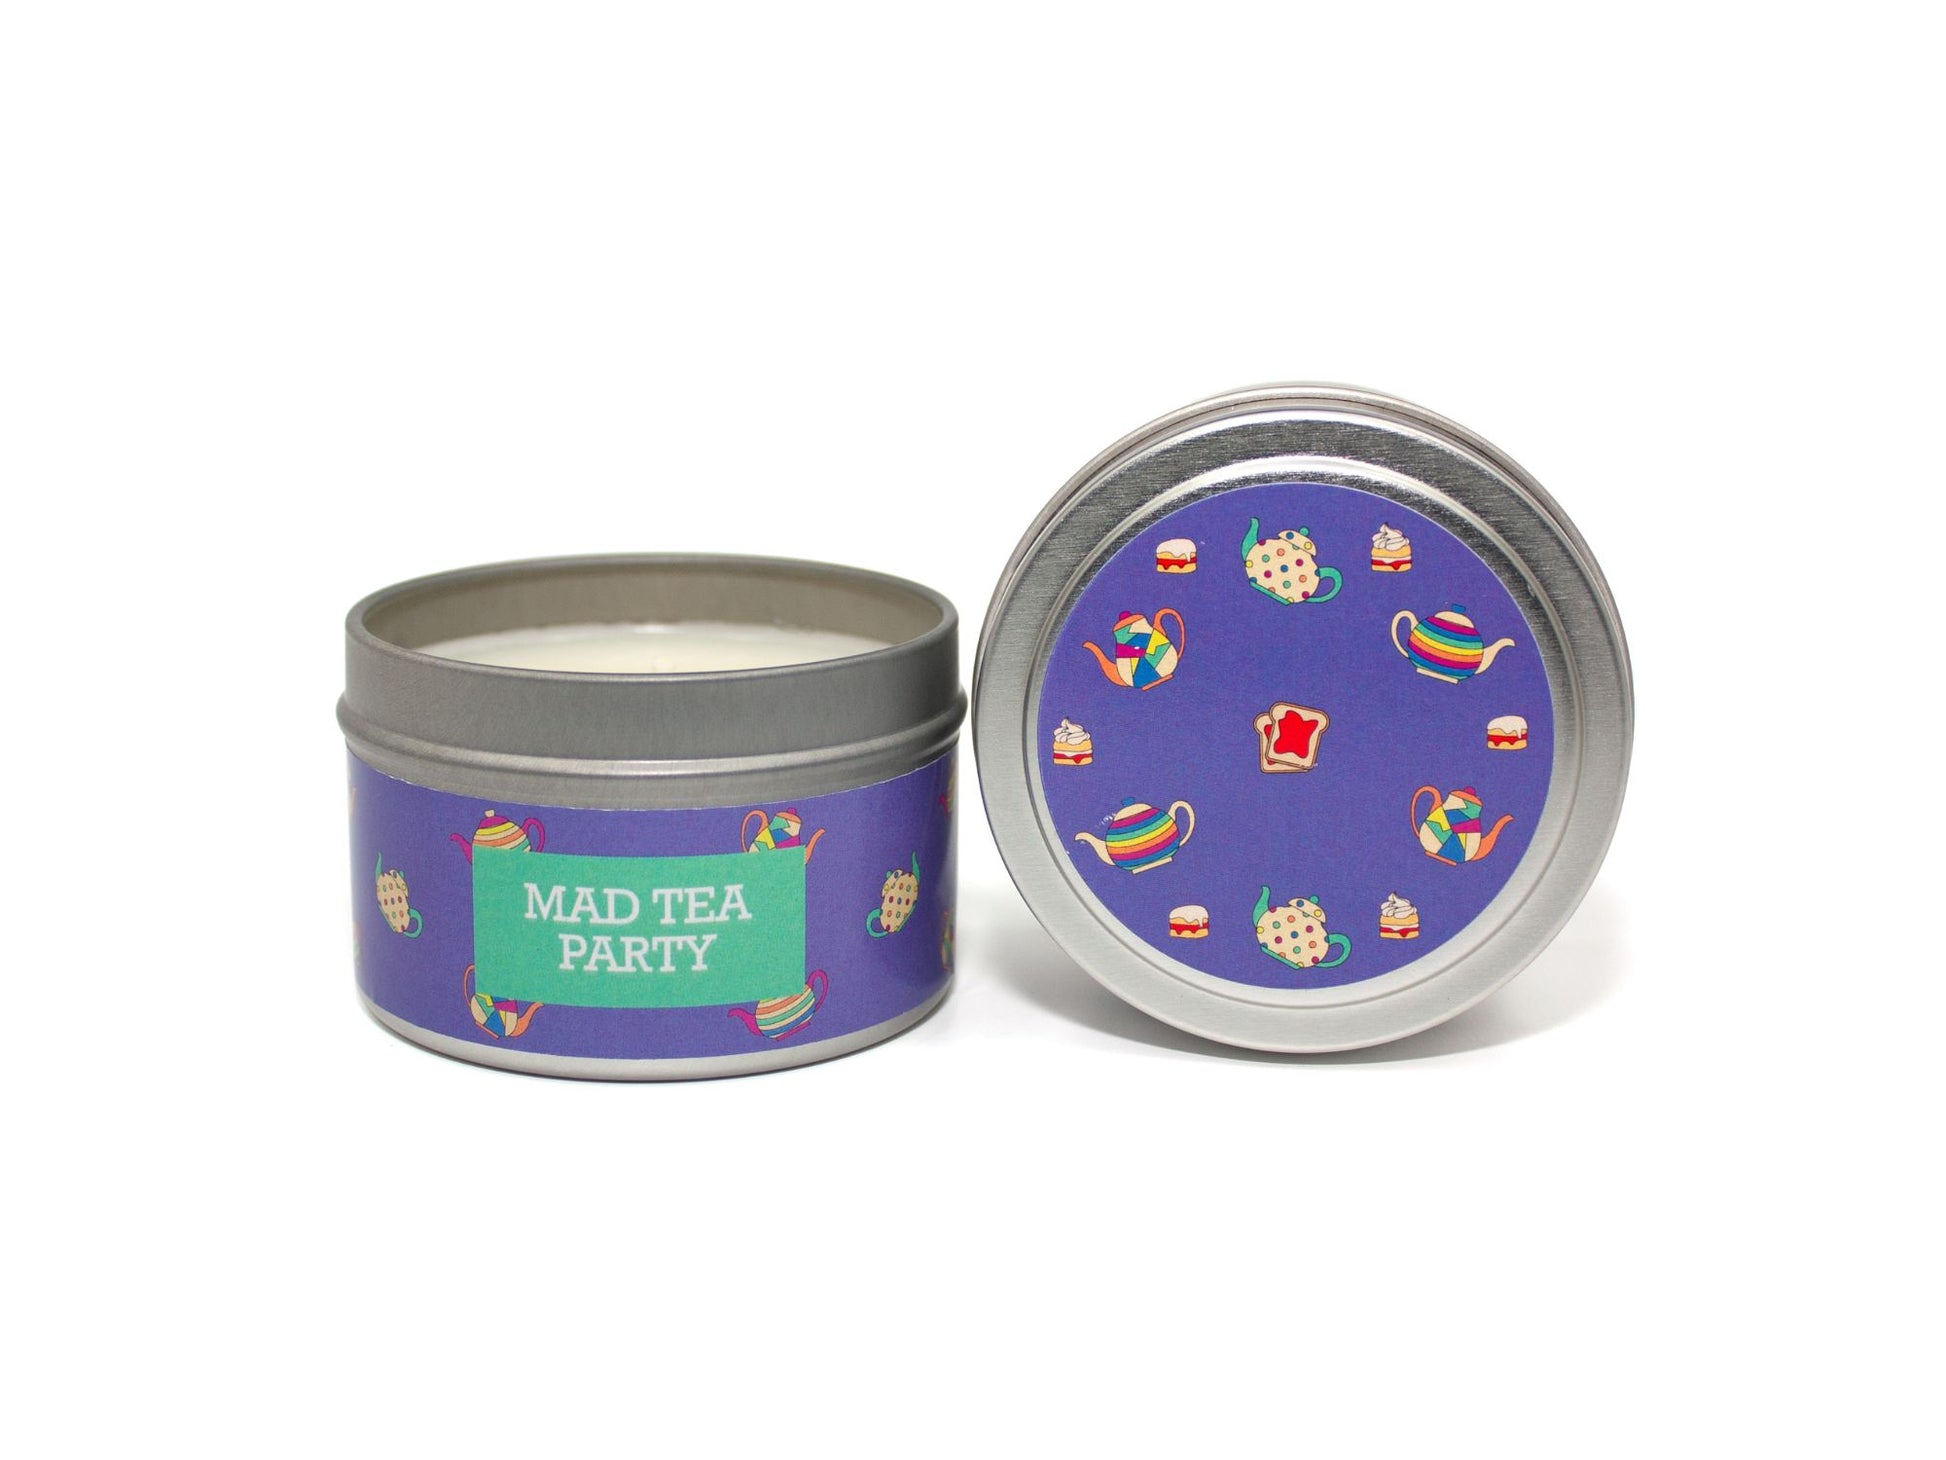 Onset & Rime earl grey tea scented candle called "Mad Tea Party" in a 4 oz silver tin. The circular label on top is purple with a pattern of teacups, cakes and toast with strawberry jam. The text on the front label is "Mad Tea Party - Earl Grey Tea, Strawberry Jam".